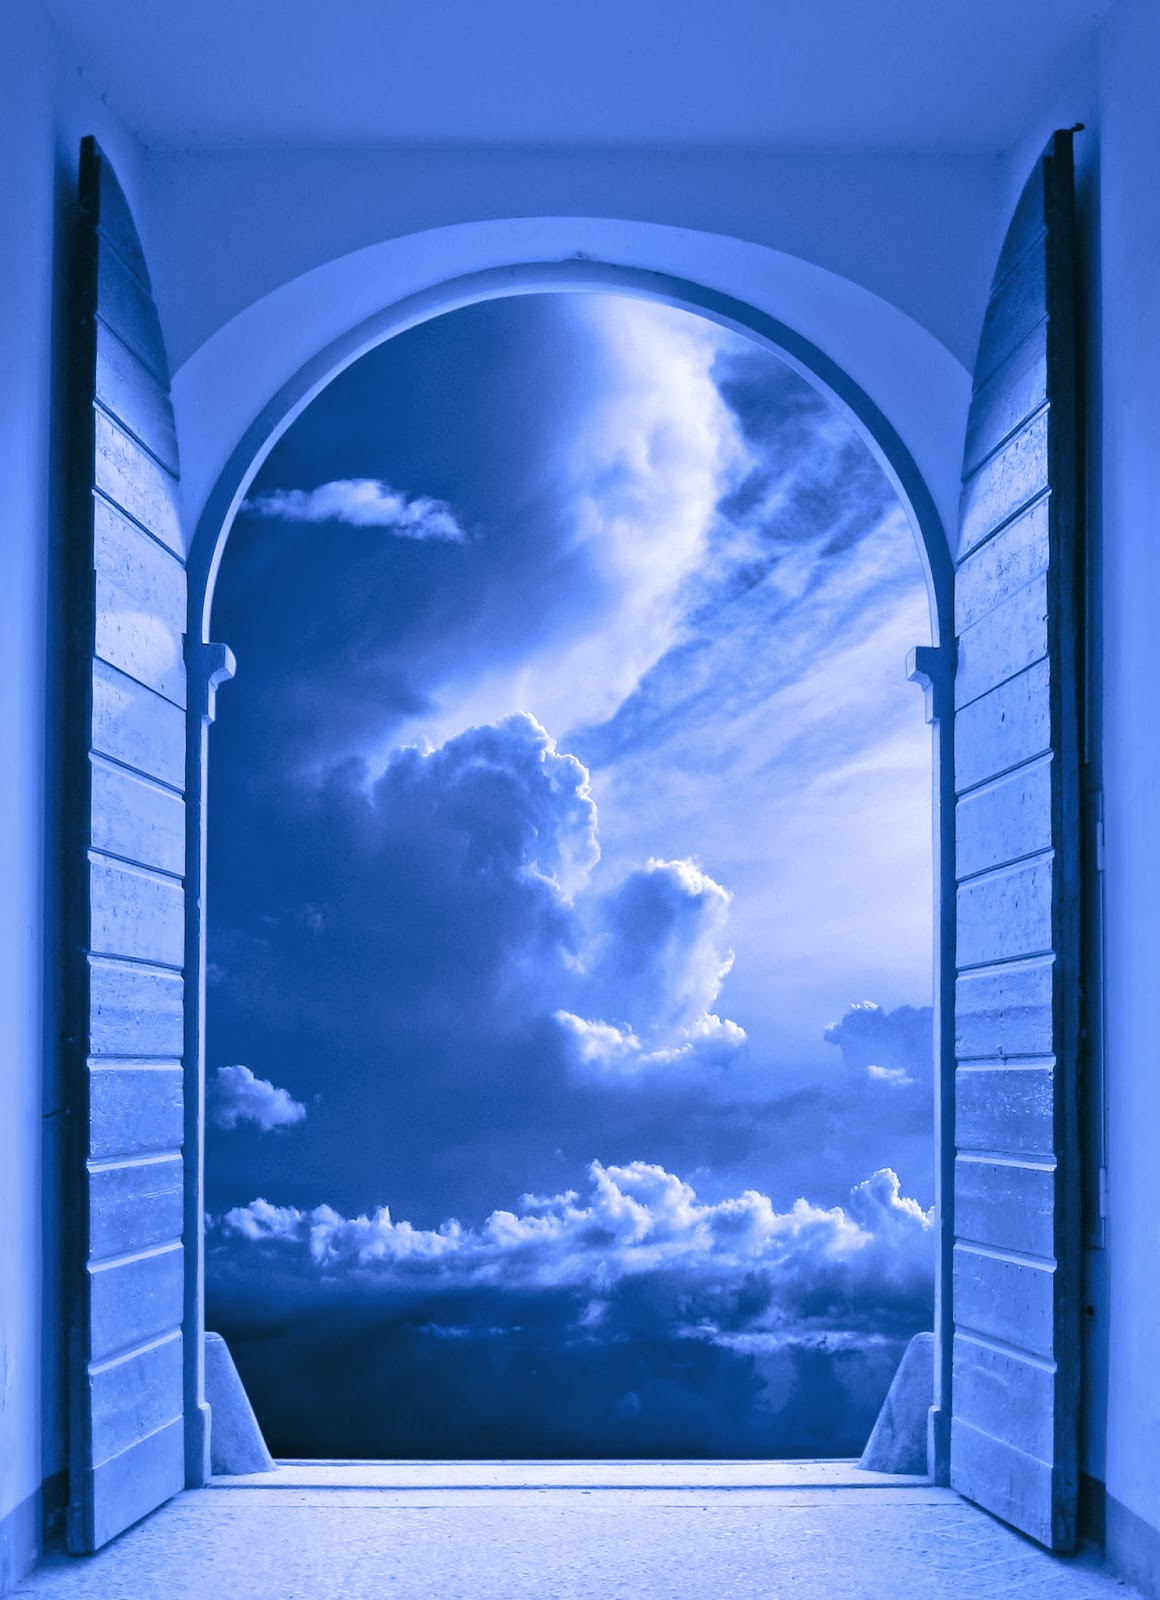 A Window Of Your Dreams